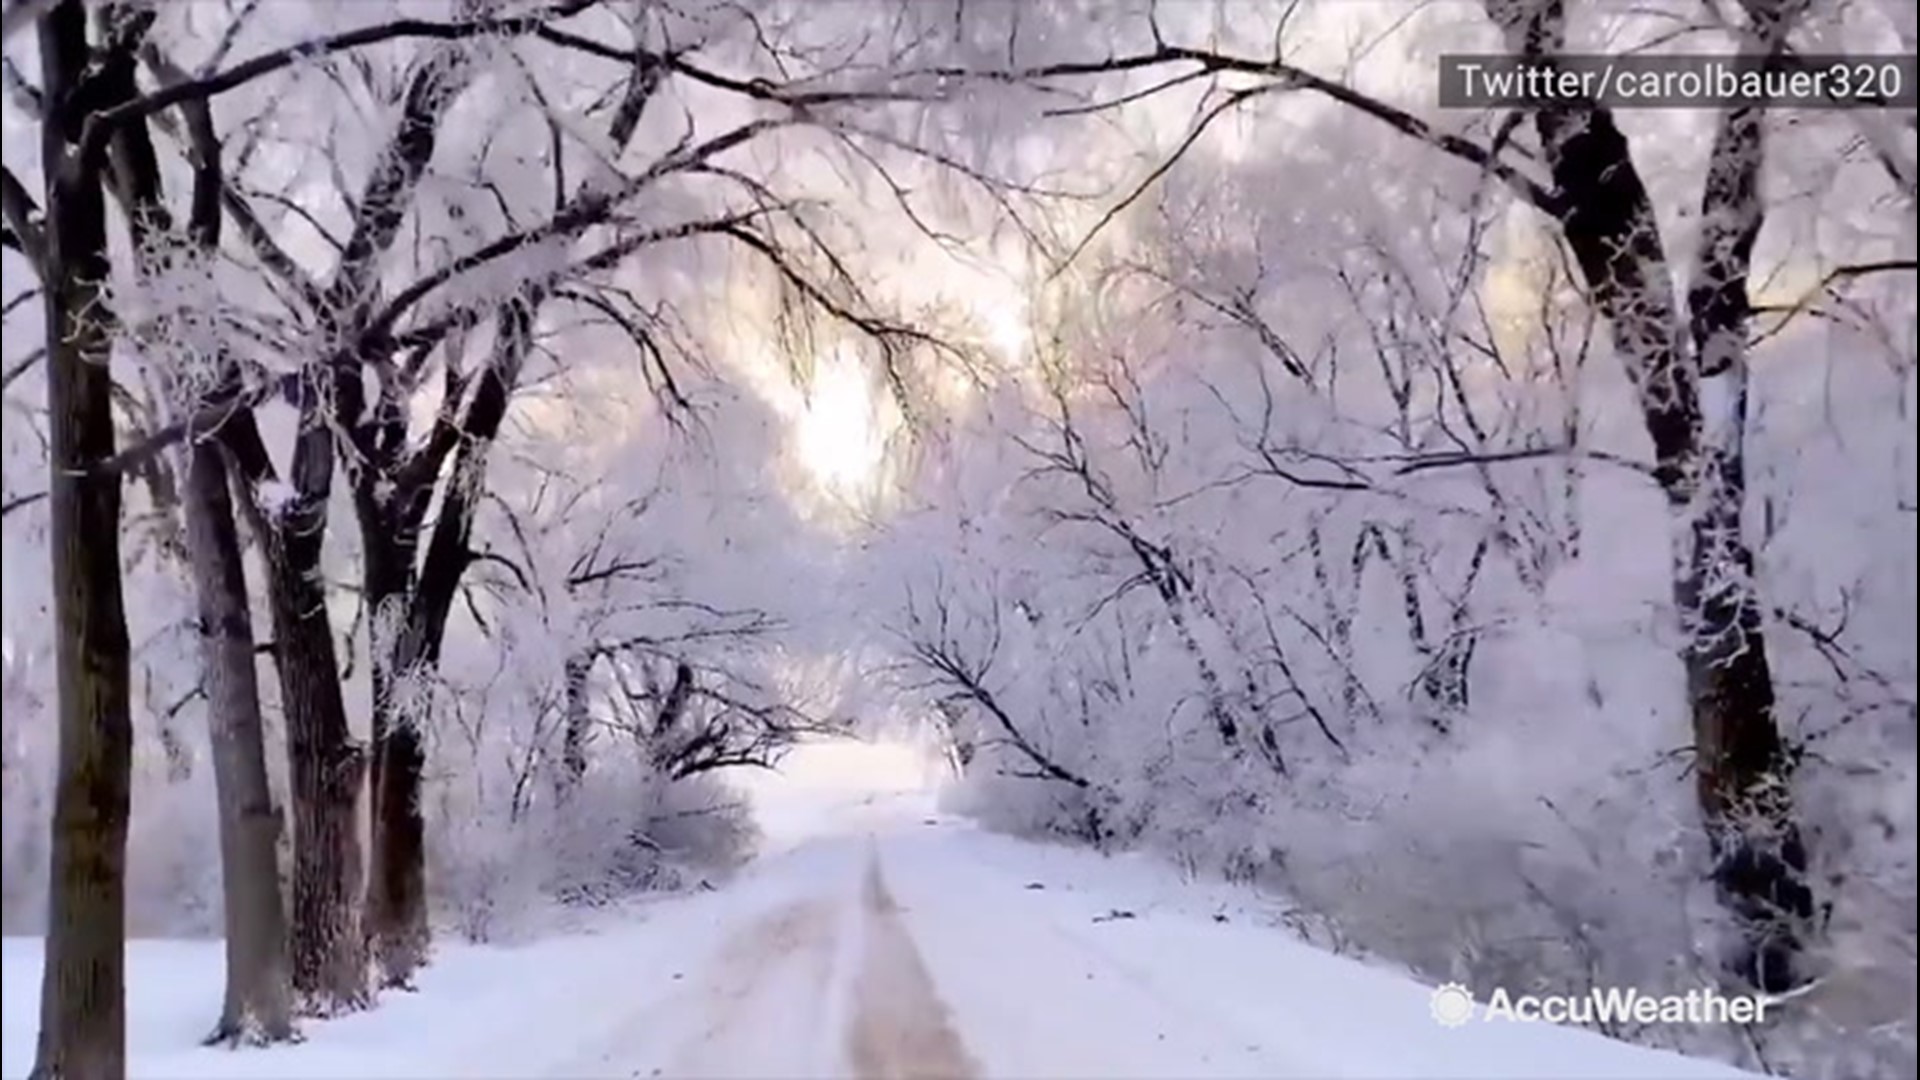 It was a winter wonderland in Graceville, Minnesota, after snow blanketed the area on Dec. 2.